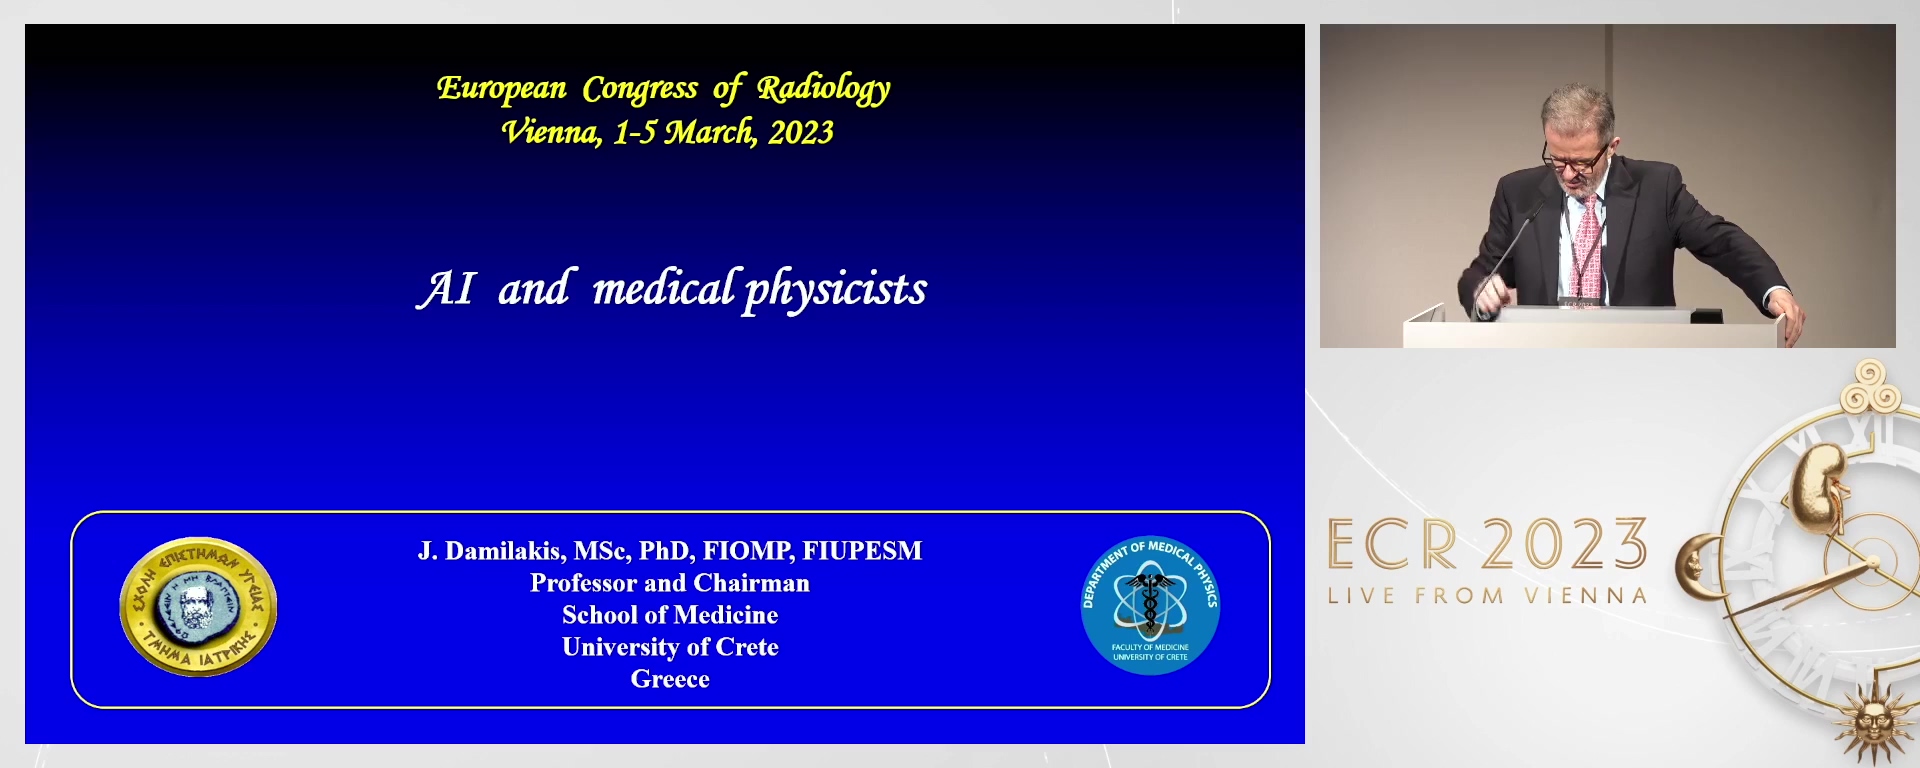 AI and medical physicists